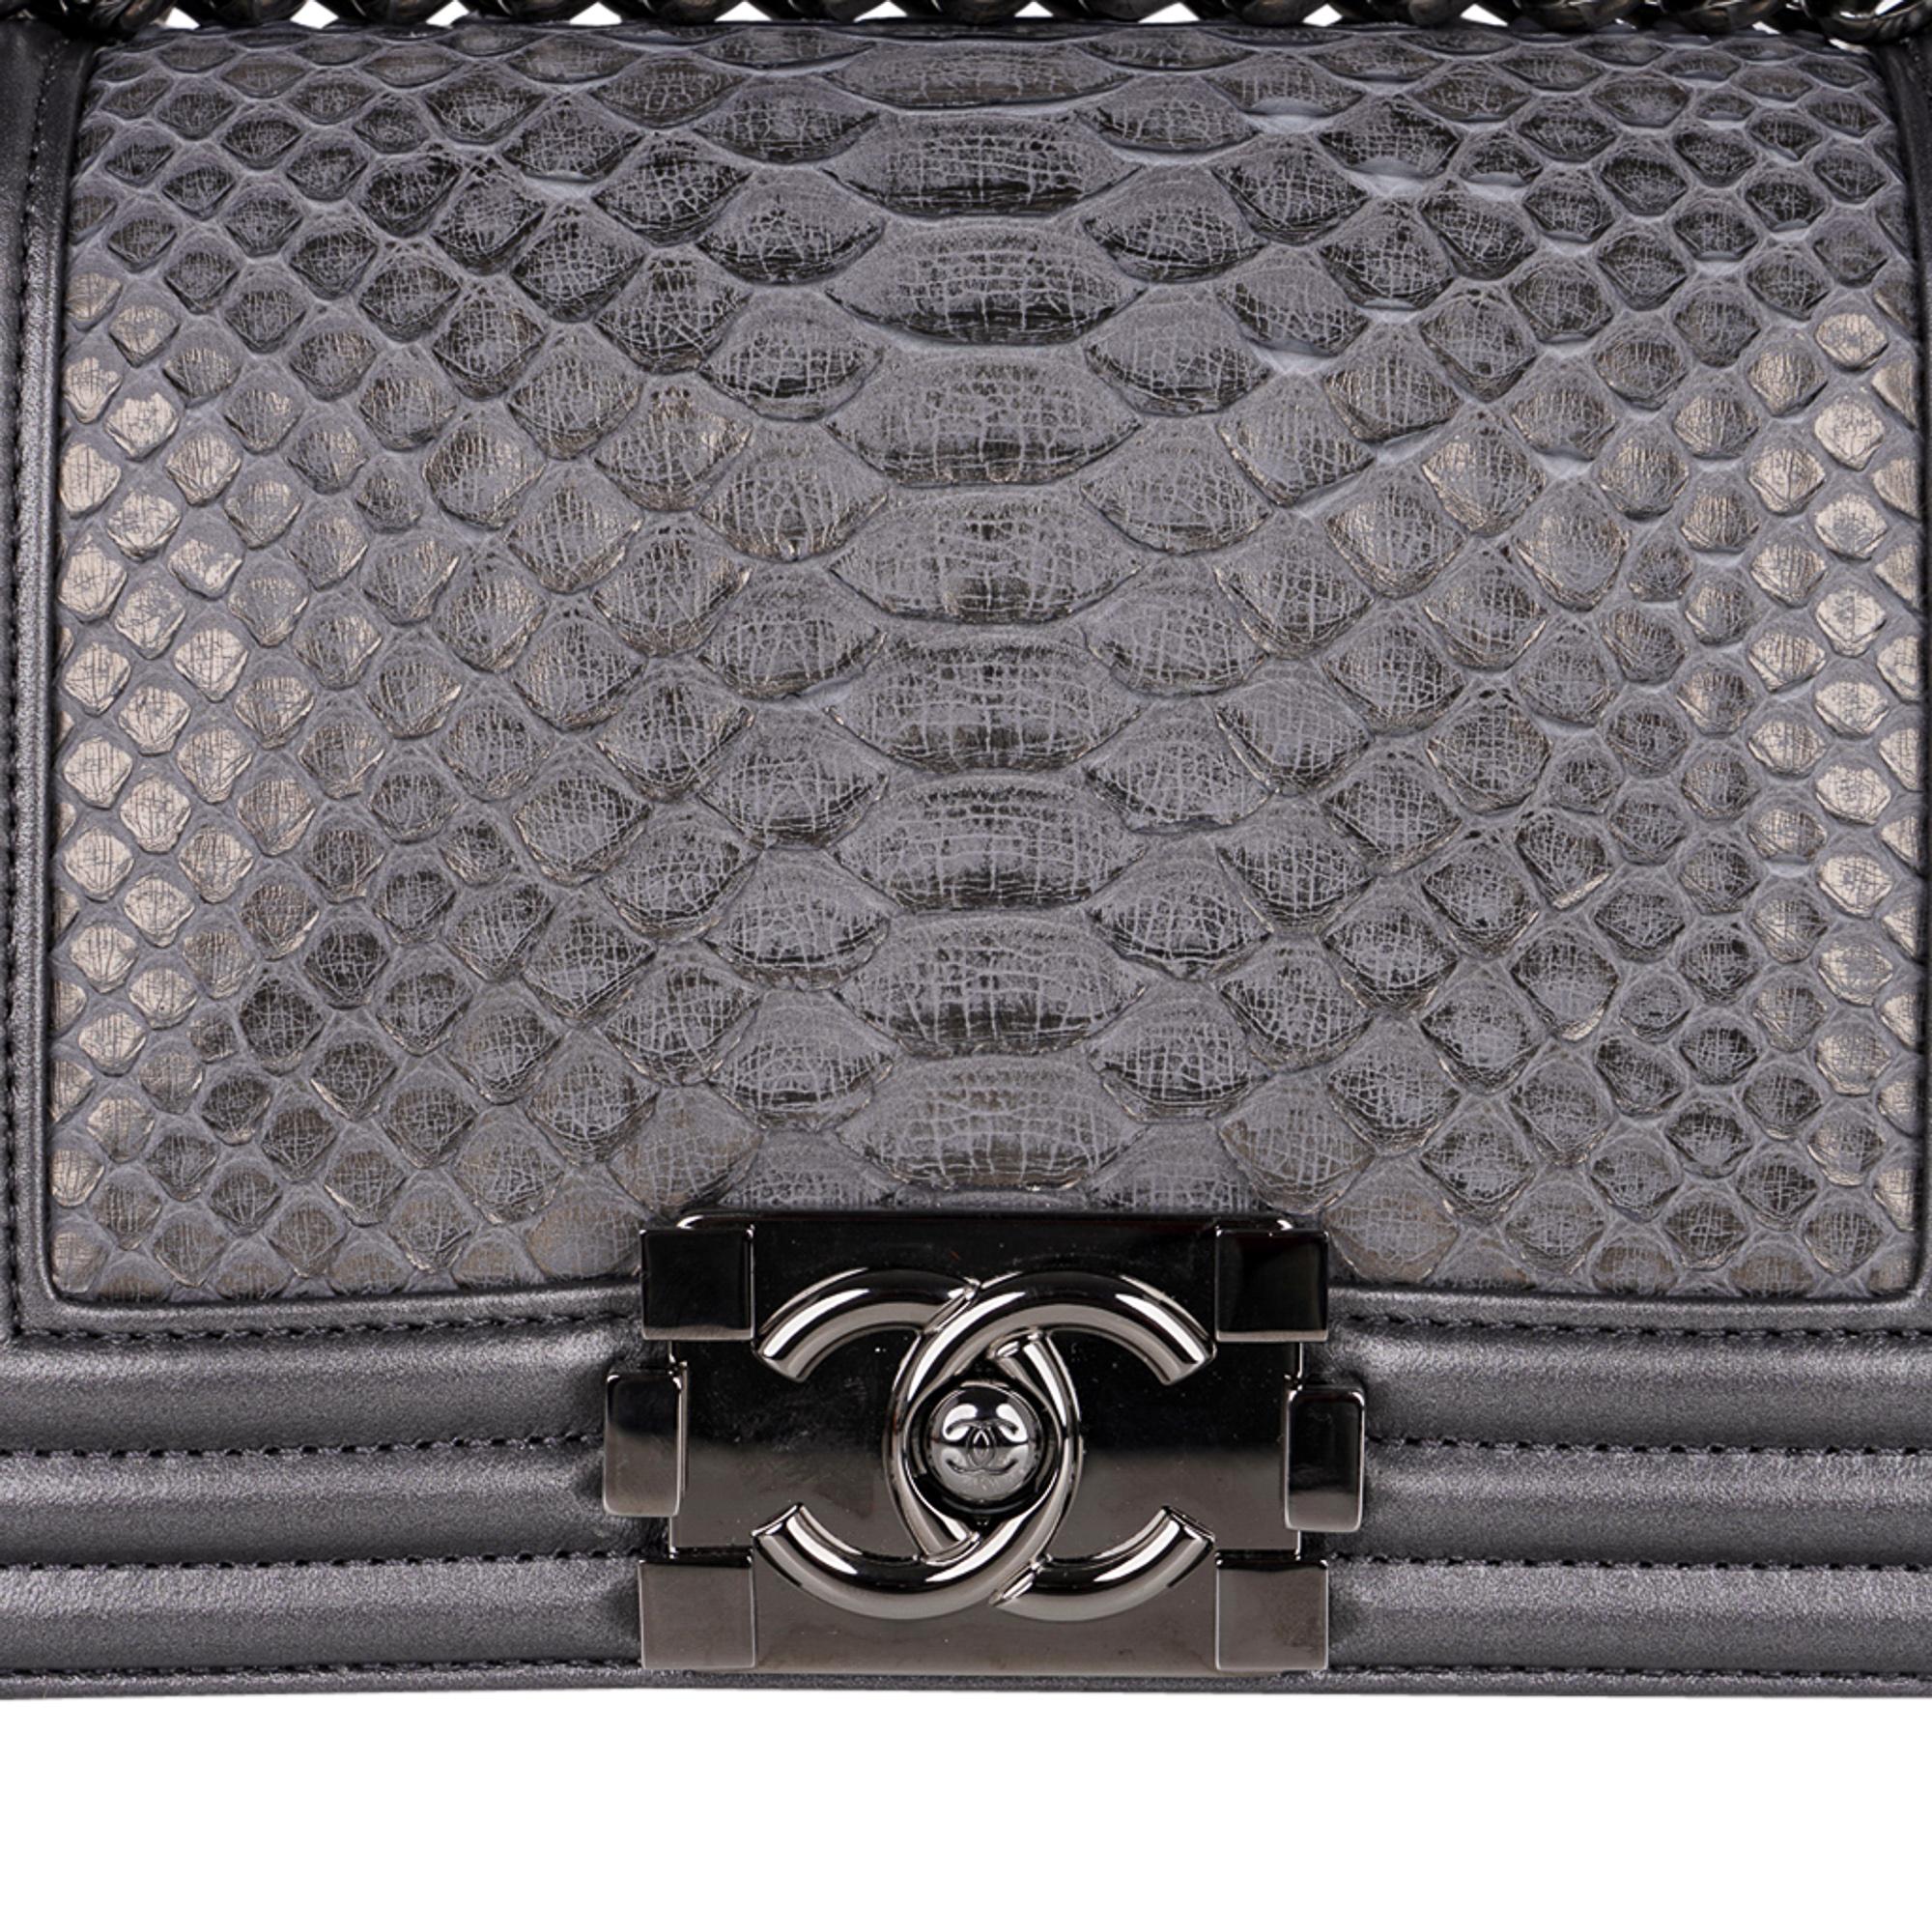 Guaranteed authentic signature Chanel medium Boy Bag featured in silver leather with python inset.
Ruthenium Lego Brick lock.
Signature coarse Gourmette chain link handle with padded shoulder strap.
Strap can be worn long as a crossbody, or doubled